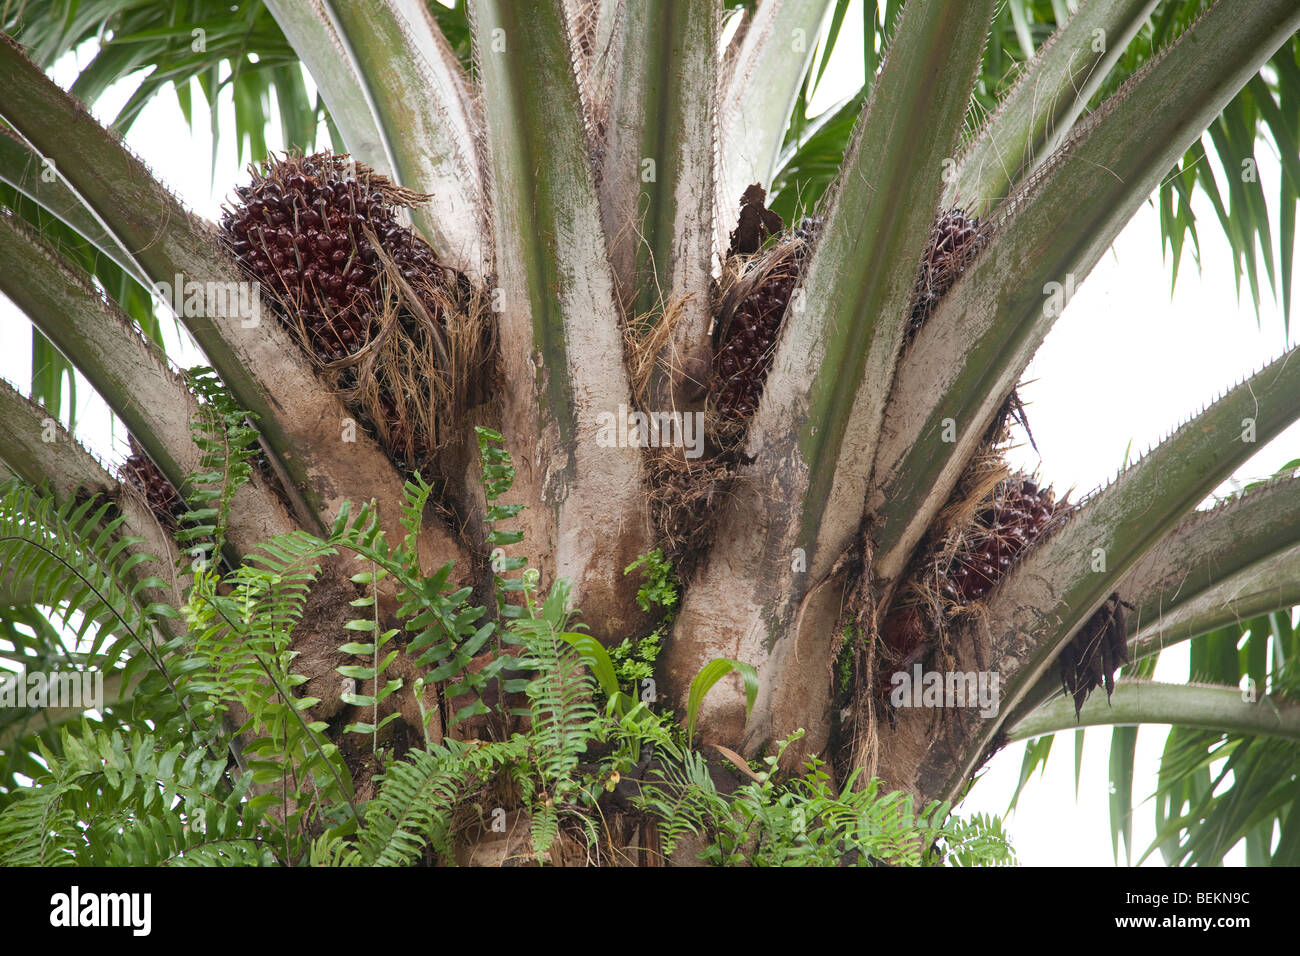 Oil palm fruits on the tree, Malaysia Stock Photo